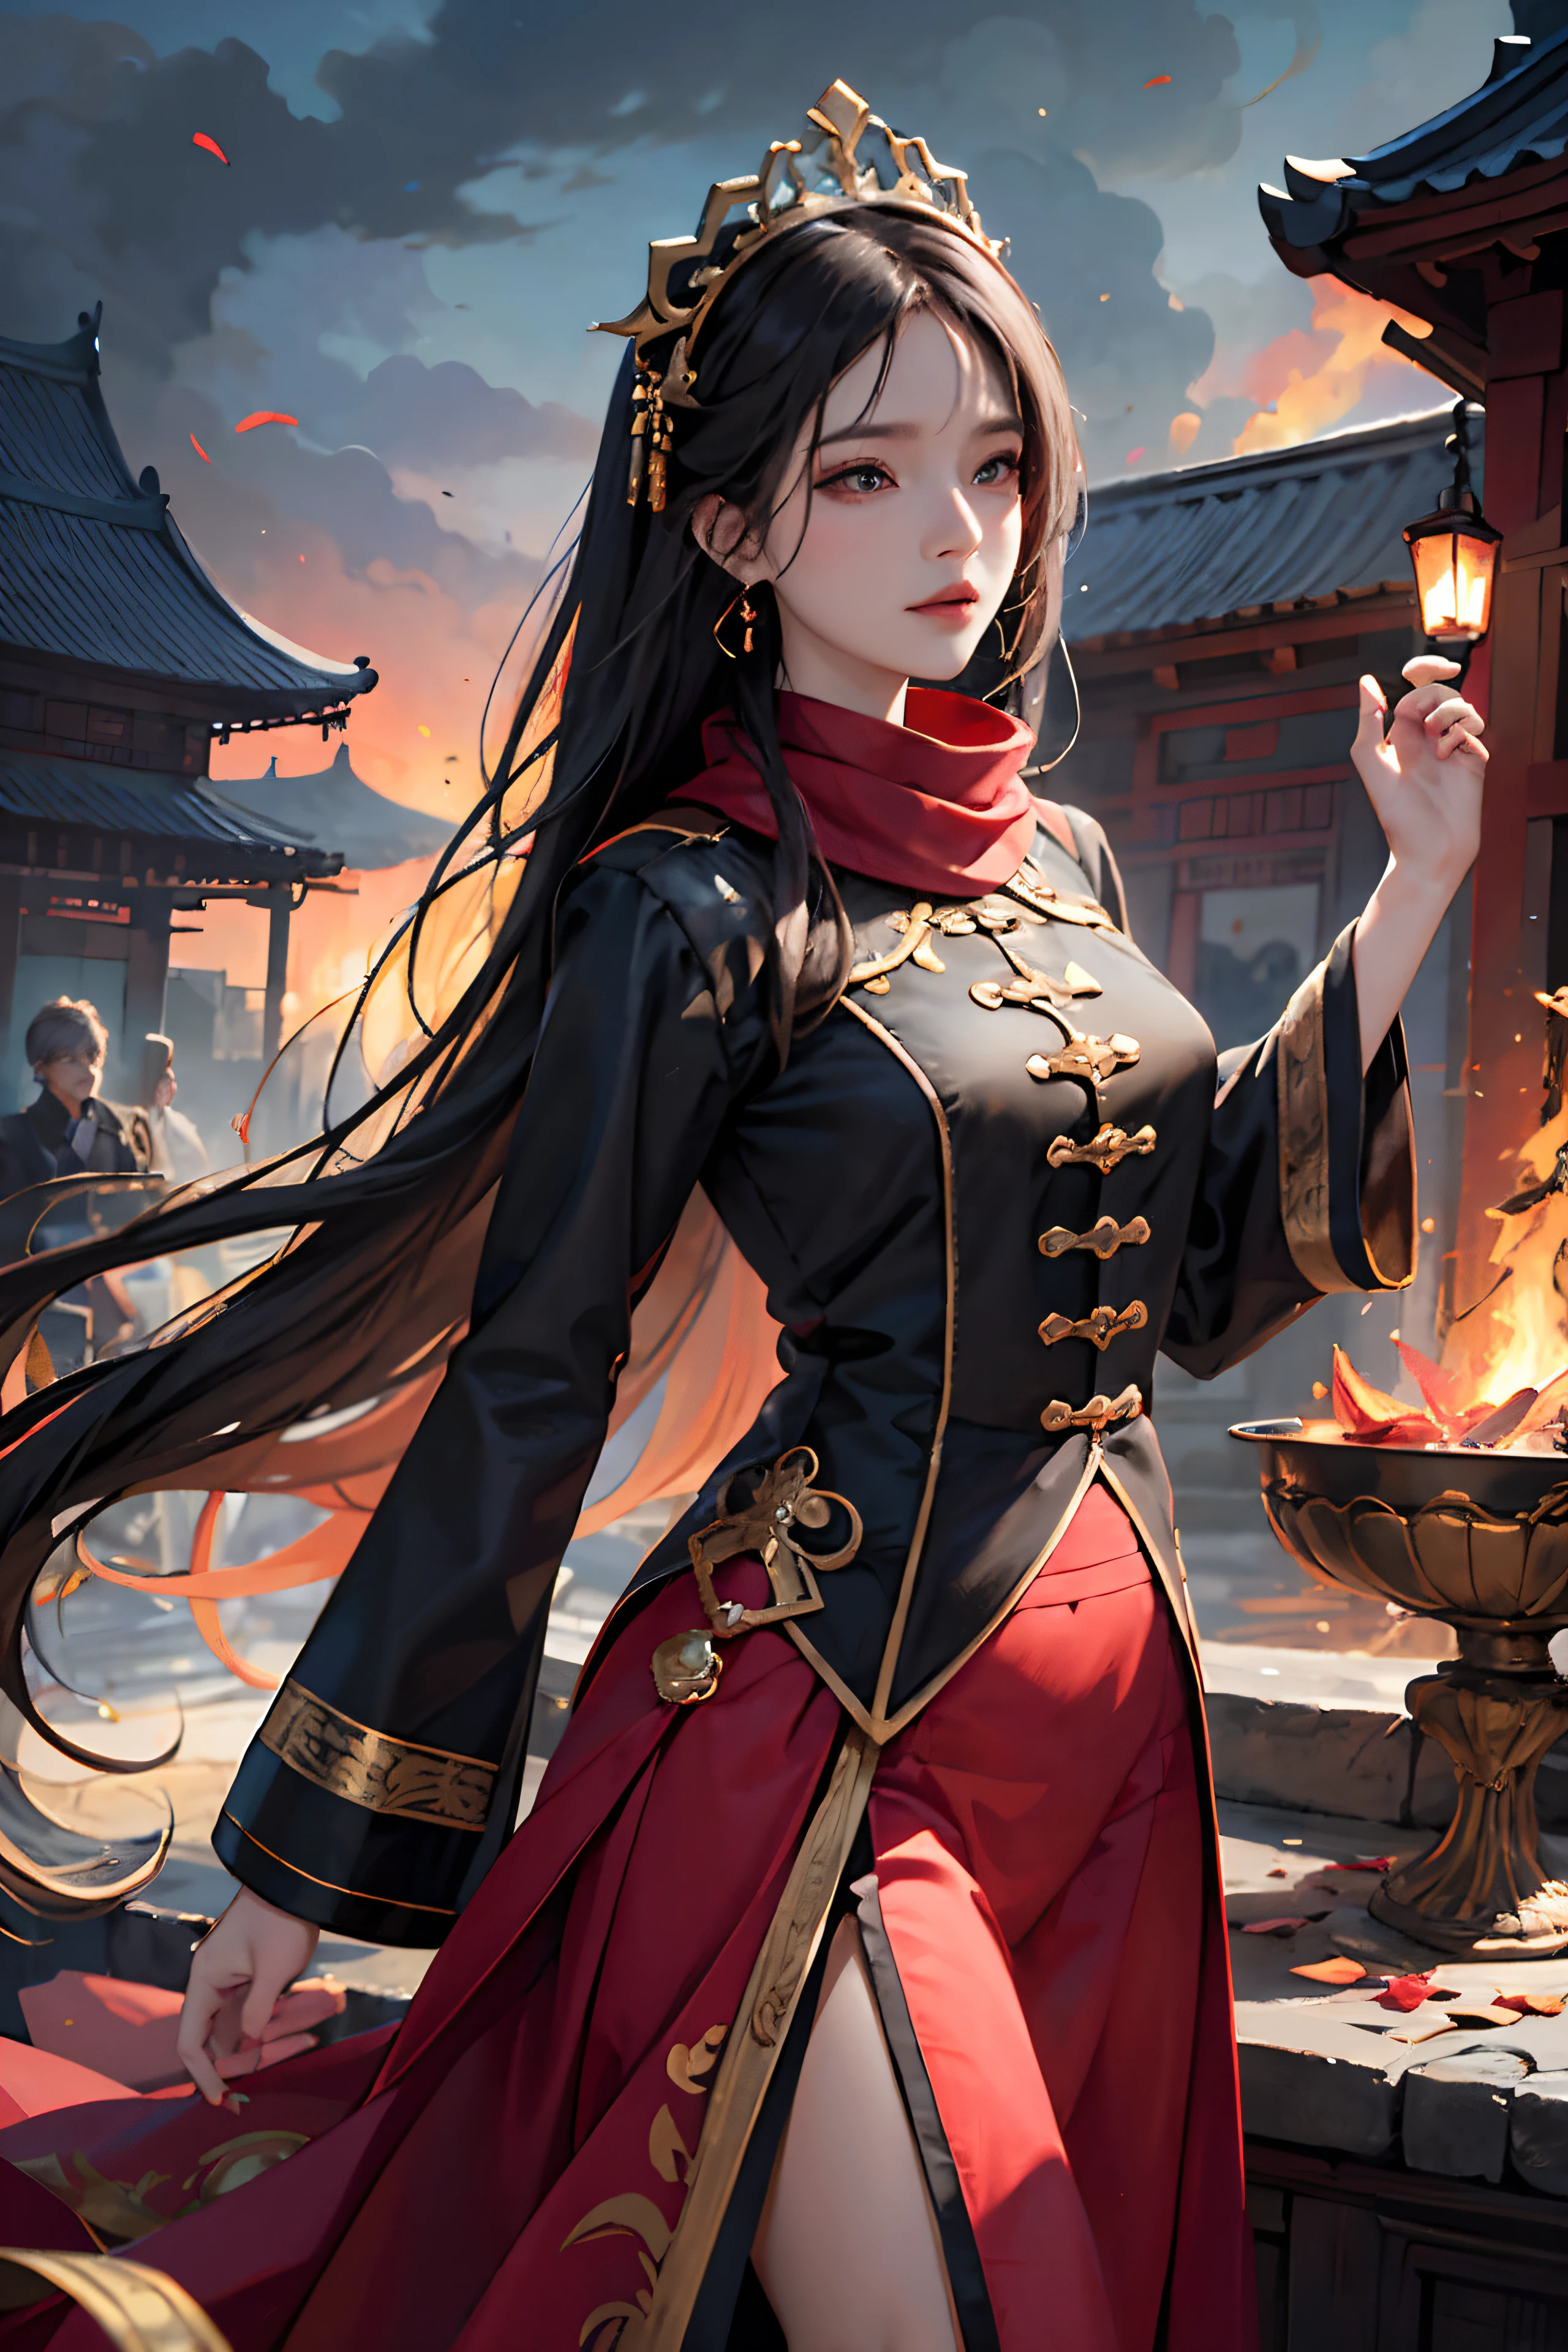 32K（tmasterpiece，k hd，hyper HD，32K）Long flowing black hair，ponds，zydink， a color， Xuzhou people （Seduce girls）， （Red scarf in the snow）， Combat posture， looking at the ground， Carp pattern headdress， Chinese long-sleeved silver cheongsam， （Abstract gouache splash：1.2）， perfect eyes, ancient palace in flame，Tulips flying（realisticlying：1.4），jewelry, Fallen leaves flutter，The background is pure， A high resolution， the detail， RAW photogr， Sharp Re， Nikon D850 Film Stock Photo by Jefferies Lee 4 Kodak Portra 400 Camera F1.6 shots, Rich colors, ultra-realistic vivid textures, Dramatic lighting, Unreal Engine Art Station Trend, cinestir 800，see-through transparent clothes, fire magic, (((big fire))), ((long skirt)), smokes, sparkles, ruins, battleground, (((big fire waves)))